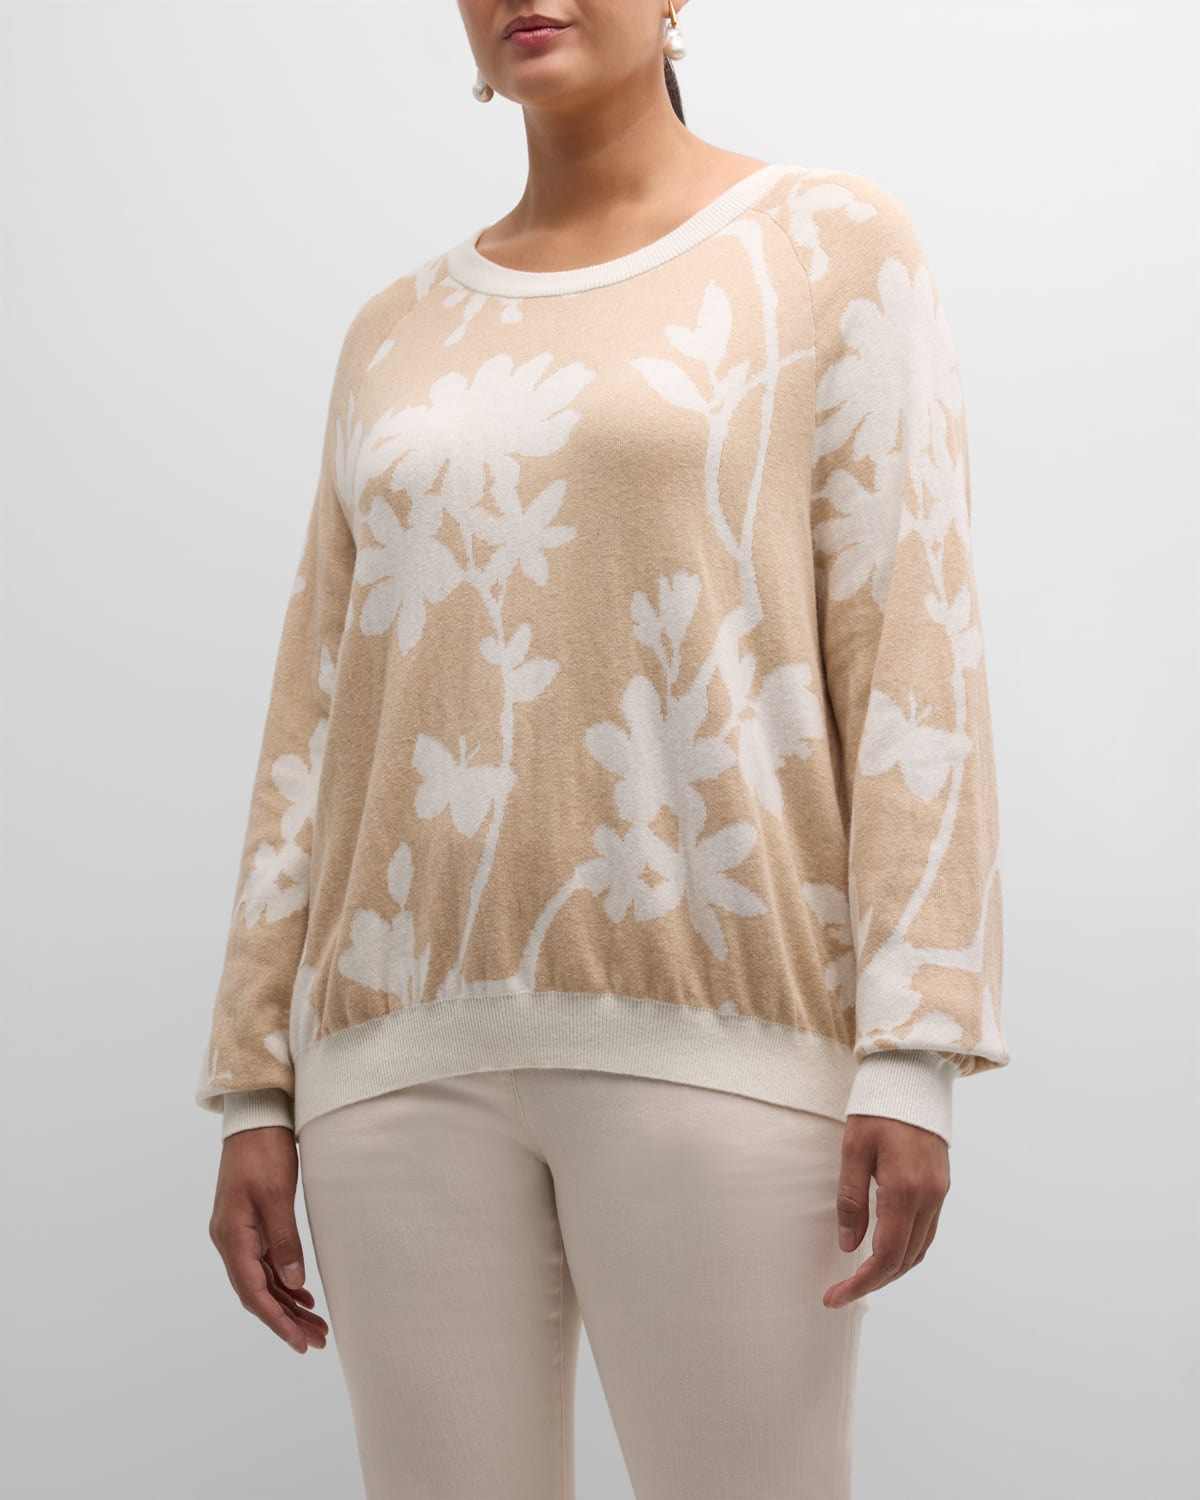 Plus Size Reversible Floral Intarsia Sweater